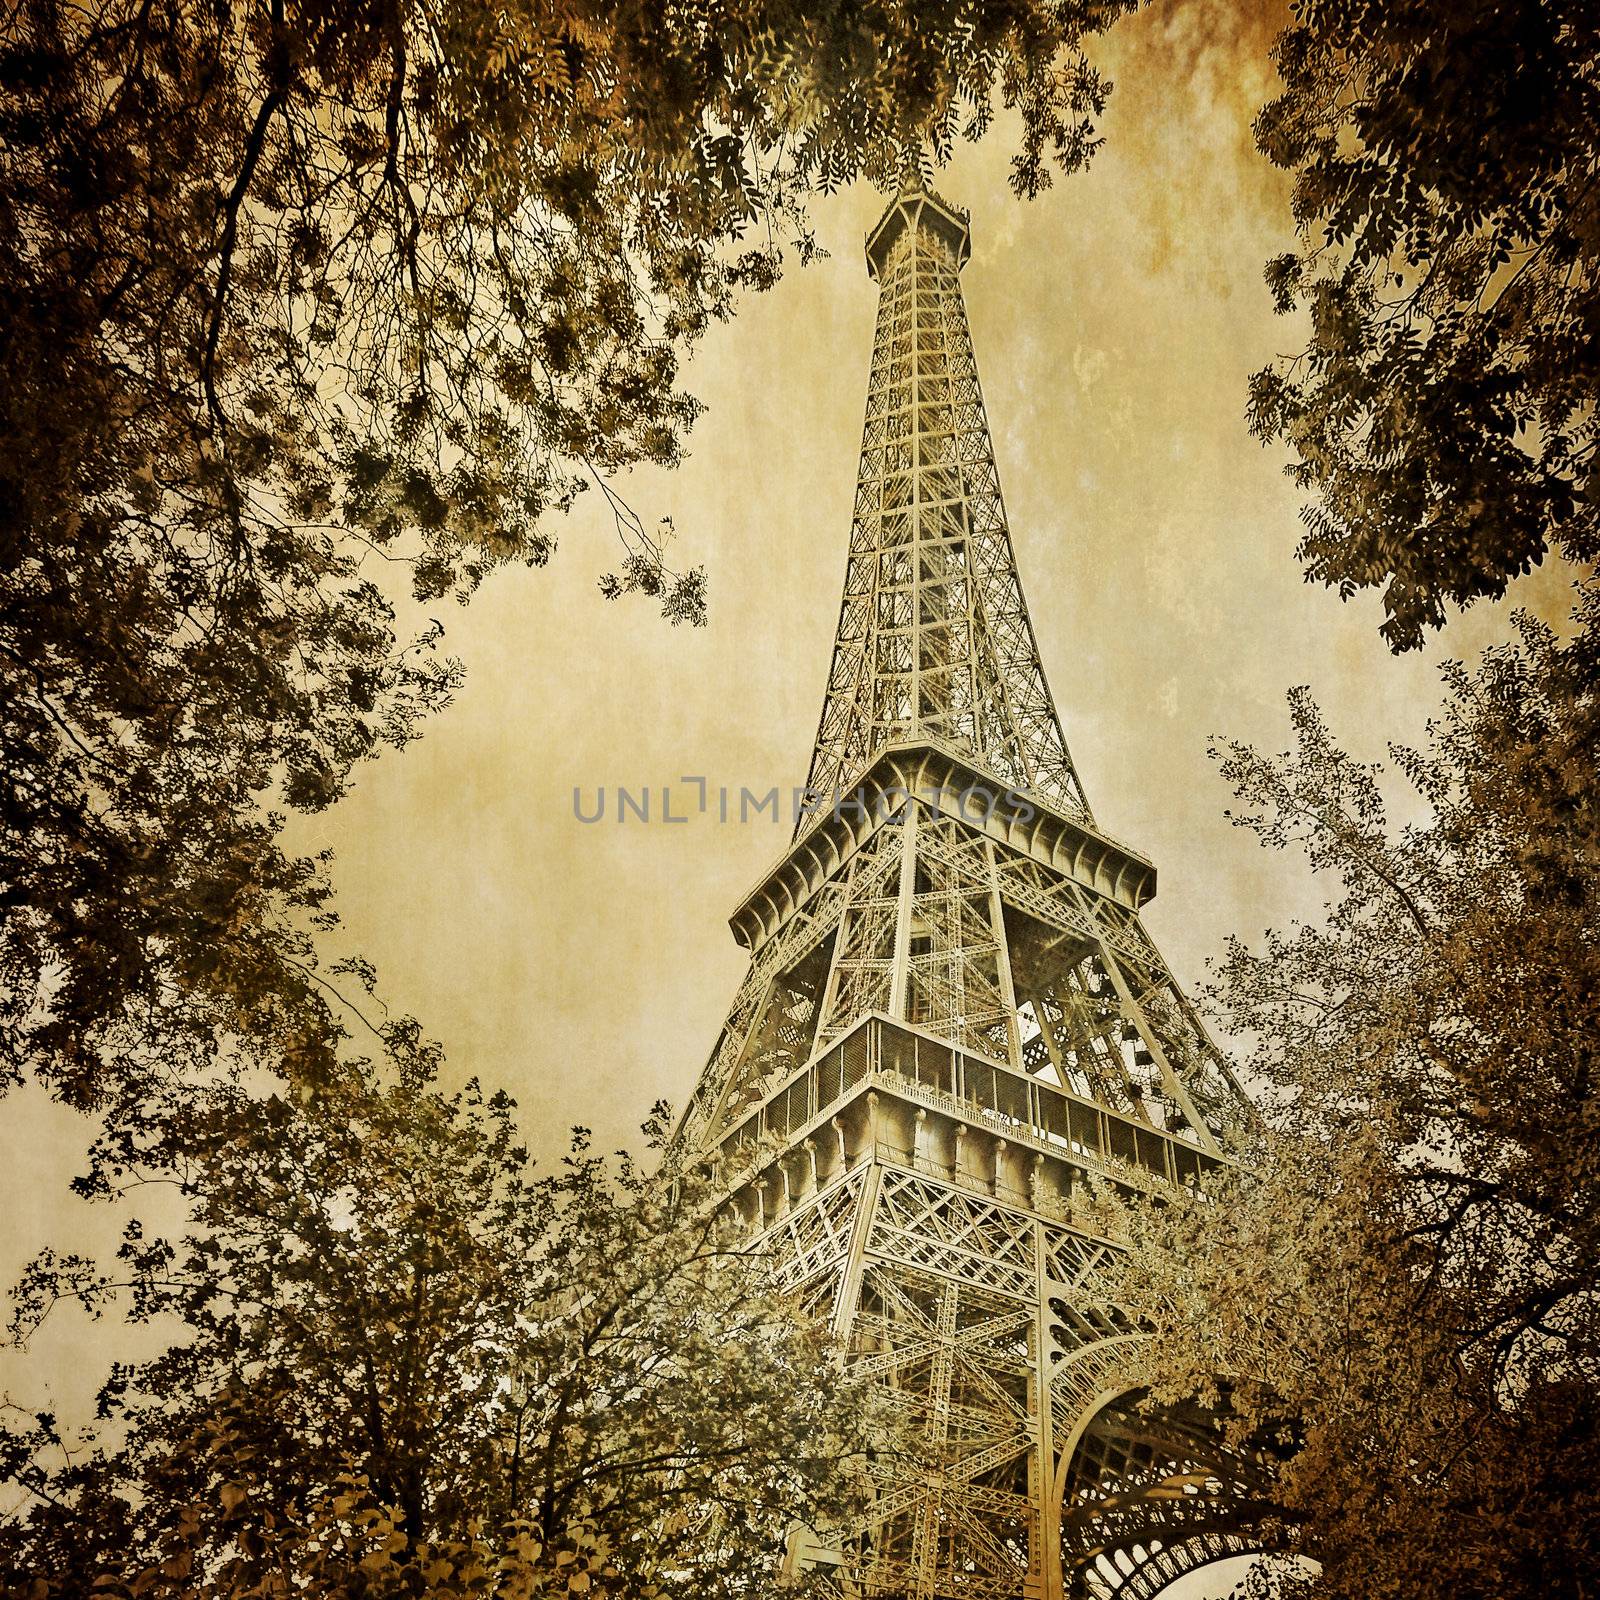 Eiffel tower monochrome vintage retro and trees by martinm303